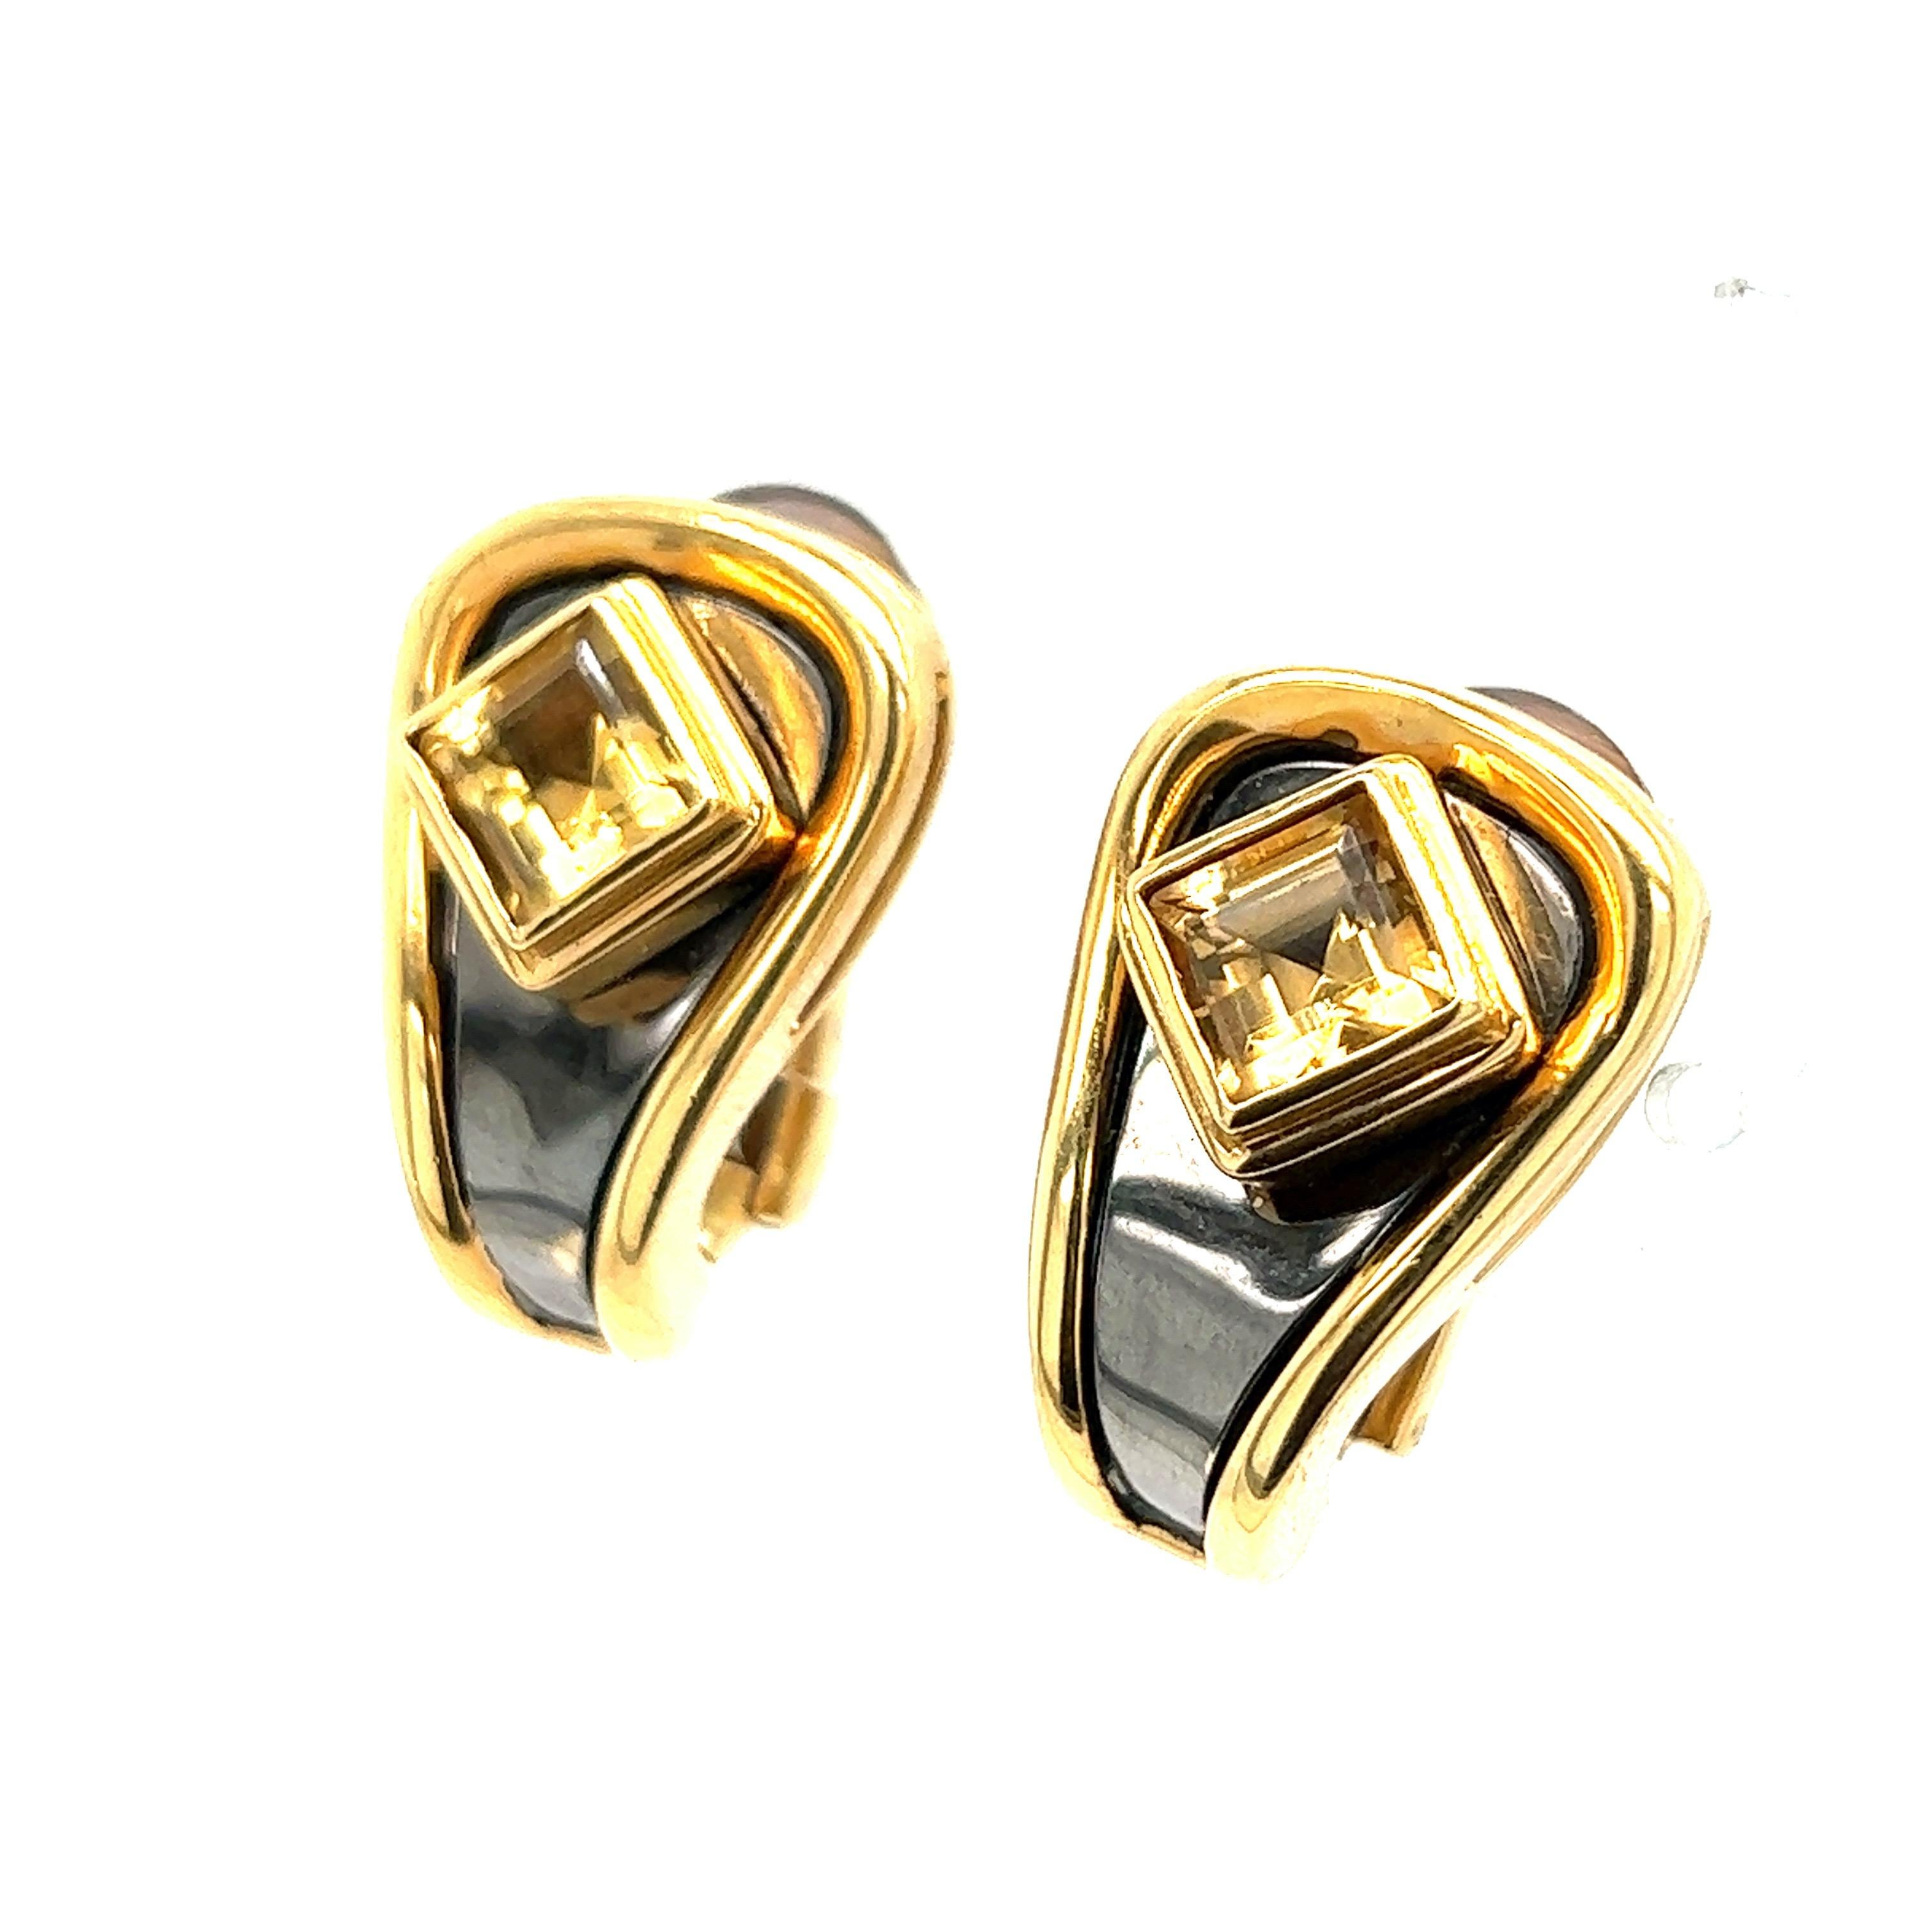 Marina B Citrine Gold Ear Clips In Excellent Condition For Sale In New York, NY